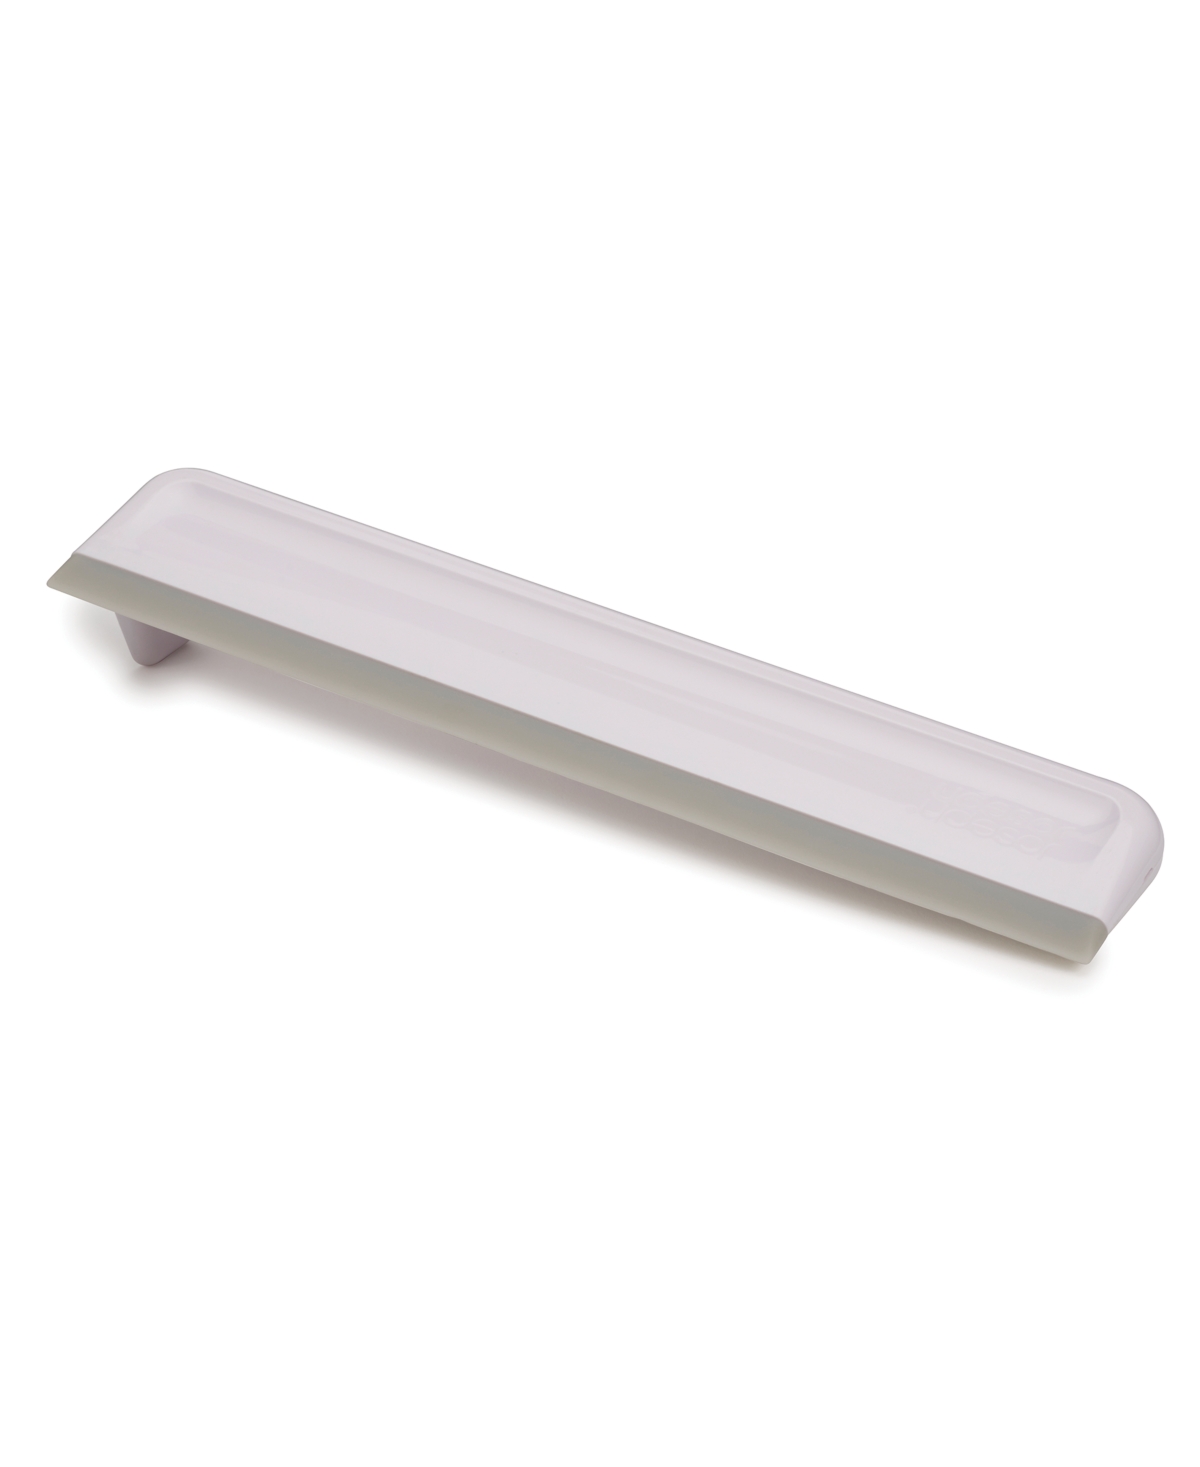 EasyStore Compact Shower Squeegee - White